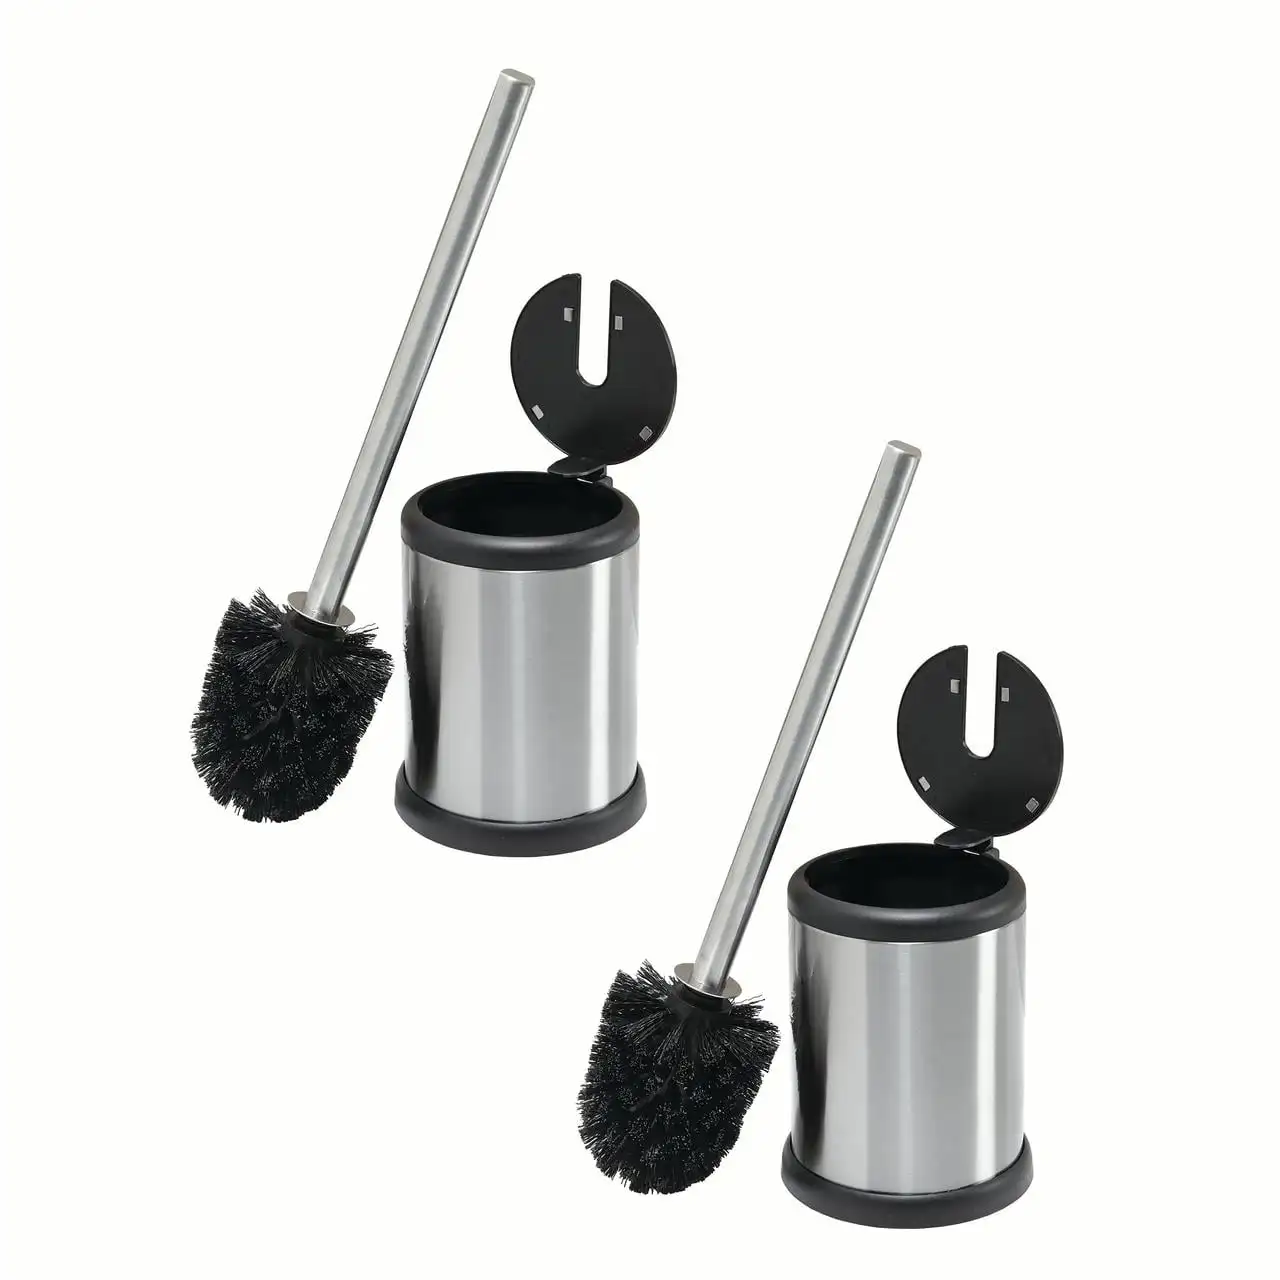 

Bath Bliss 2 Pack Self Closing Lid Toilet Brush and Holder in Stainless Steel